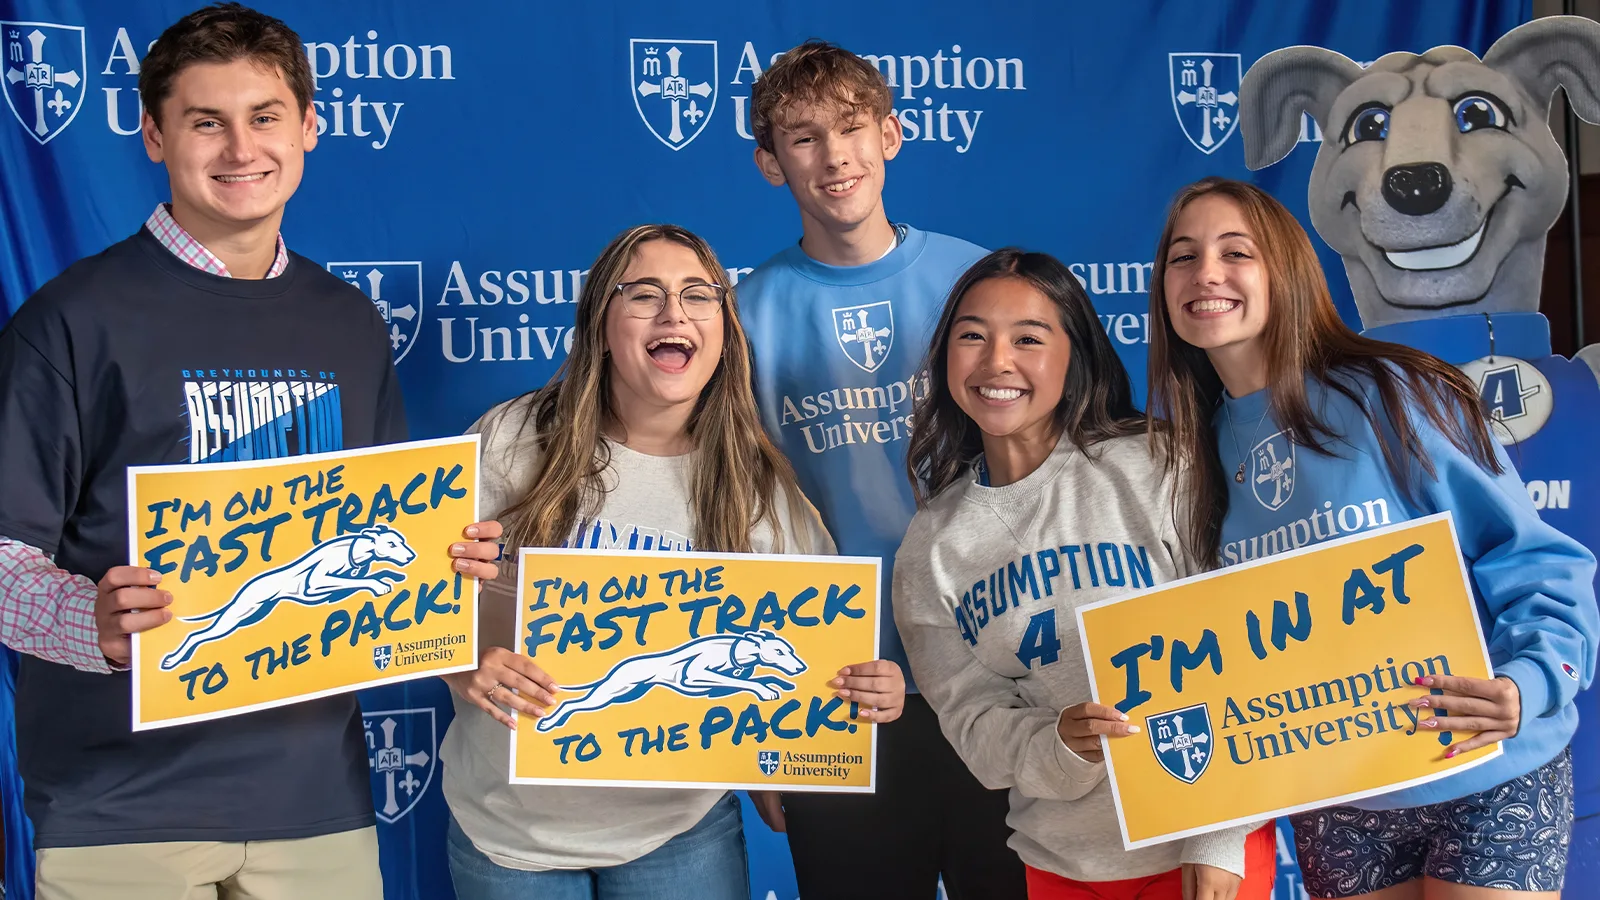 Students attend a Fast Track to the Pack event at Assumption University